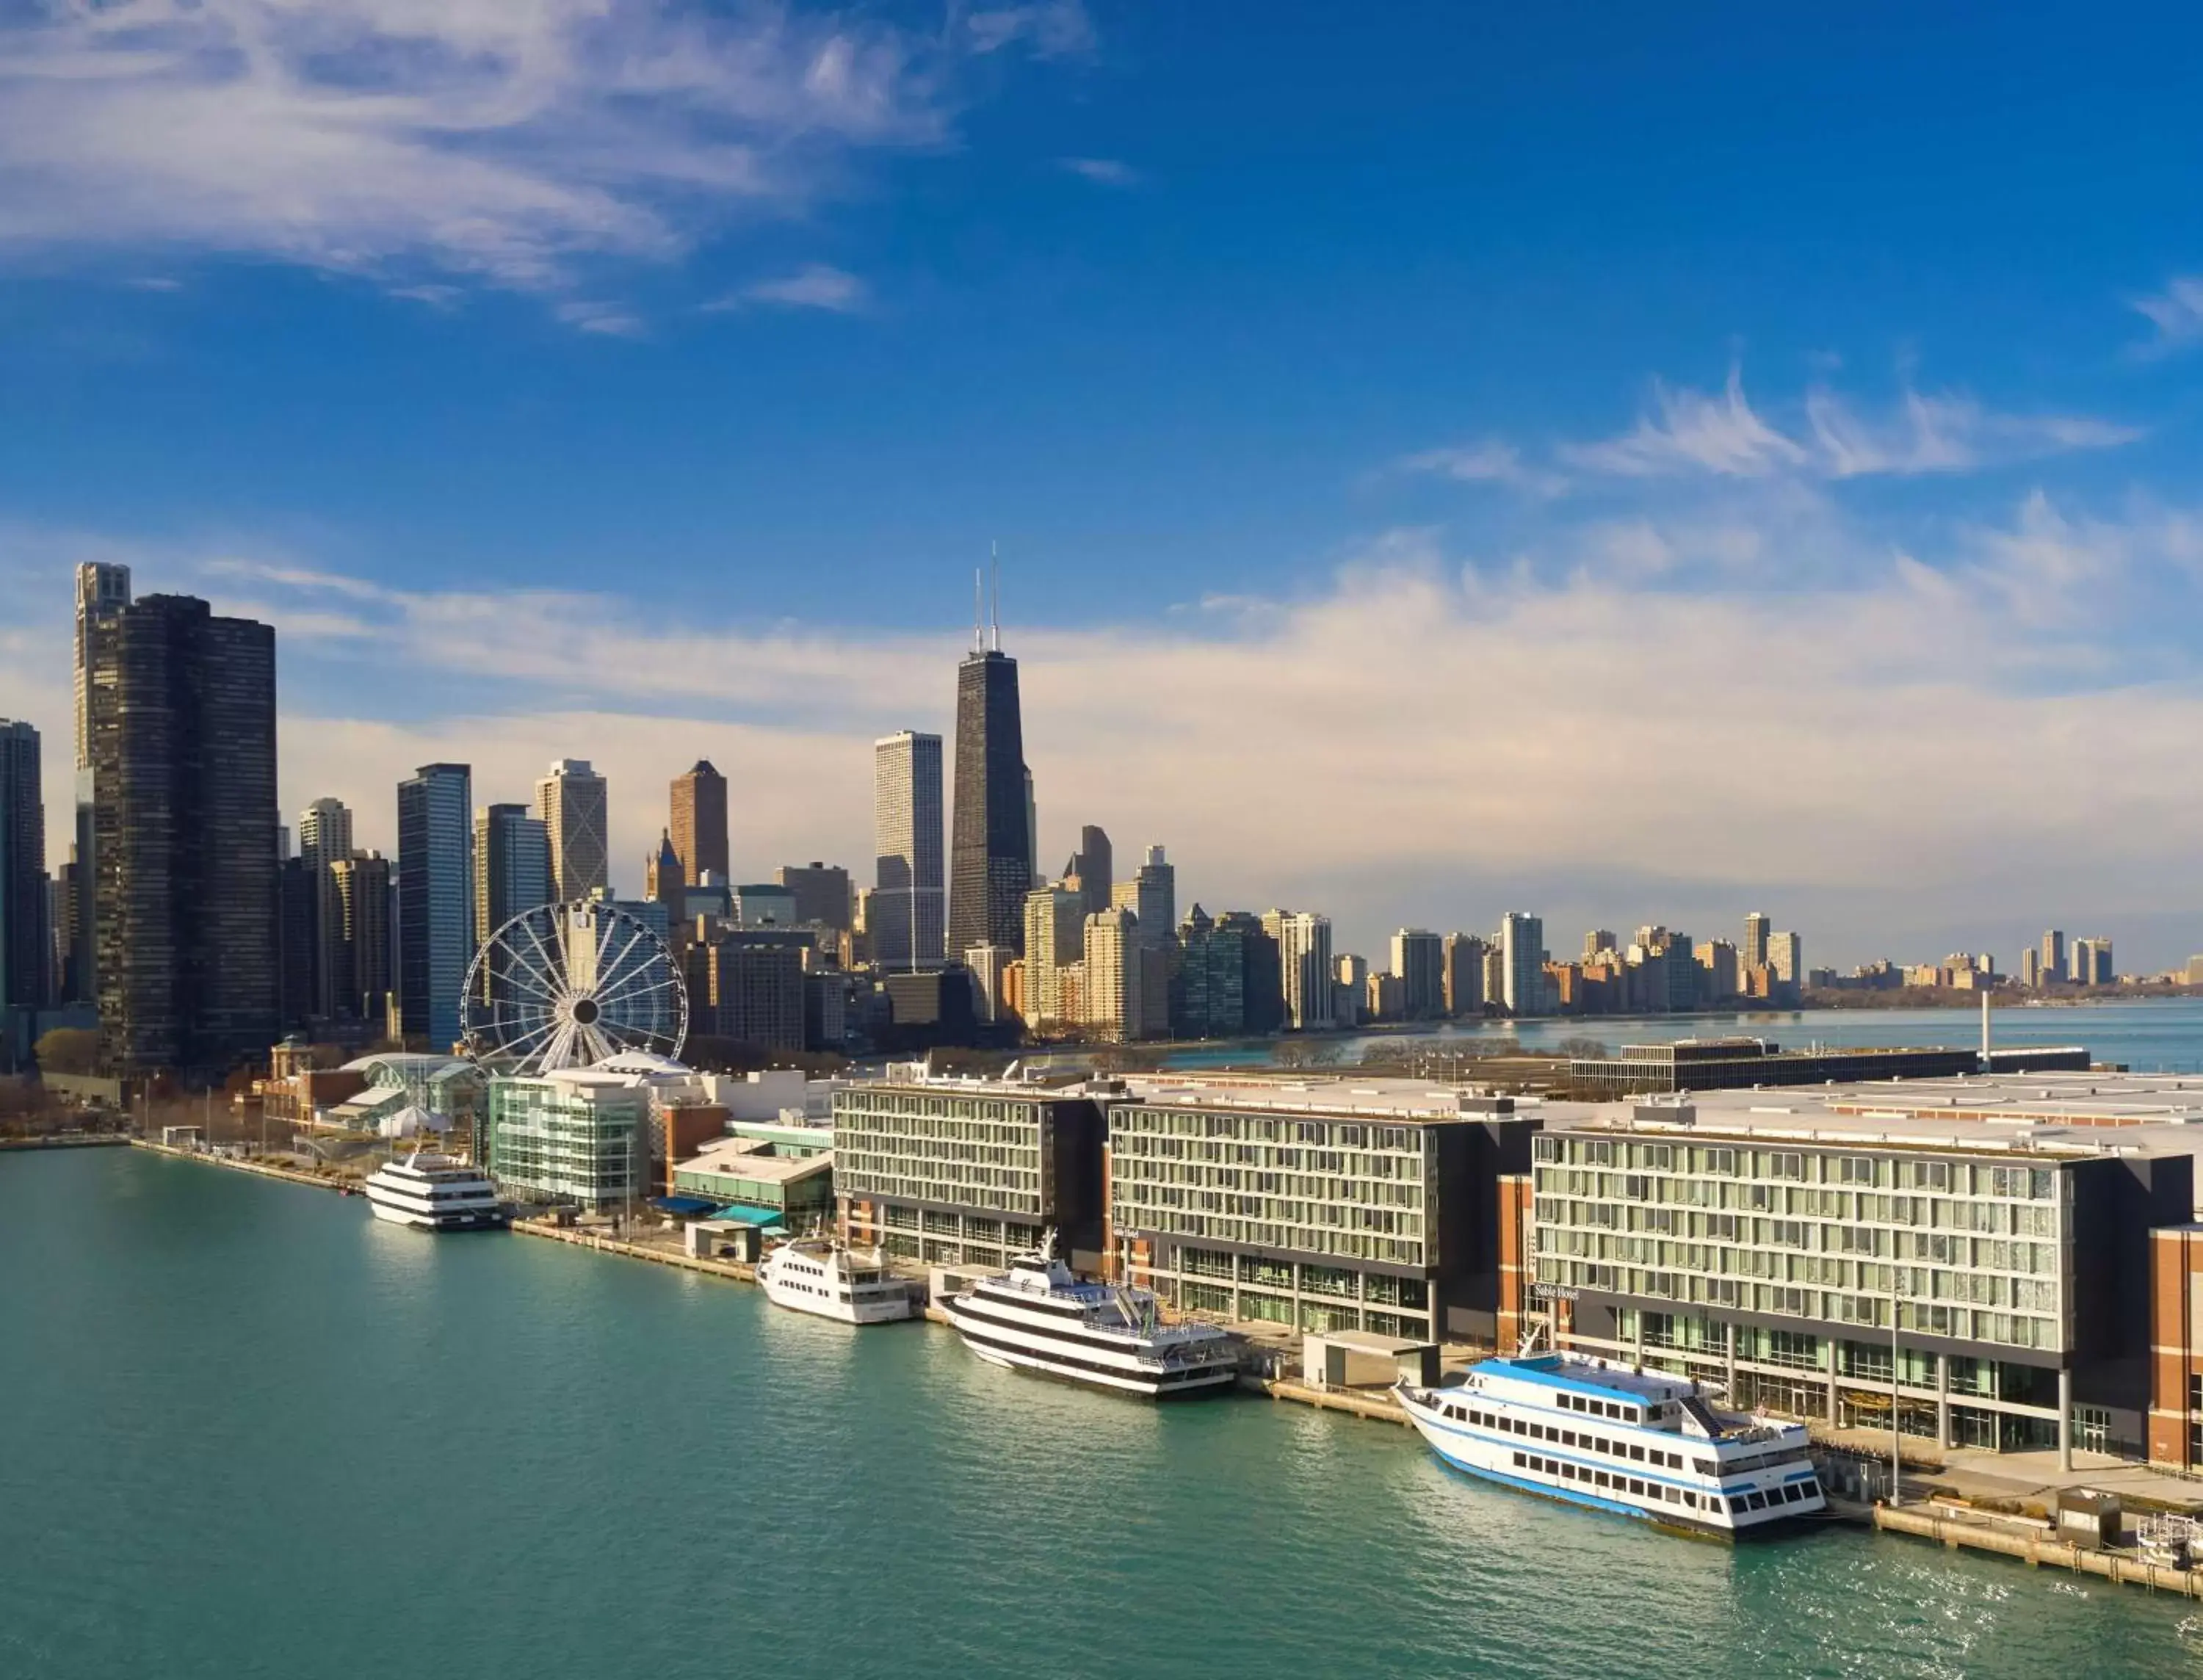 Property building in Sable At Navy Pier Chicago, Curio Collection By Hilton